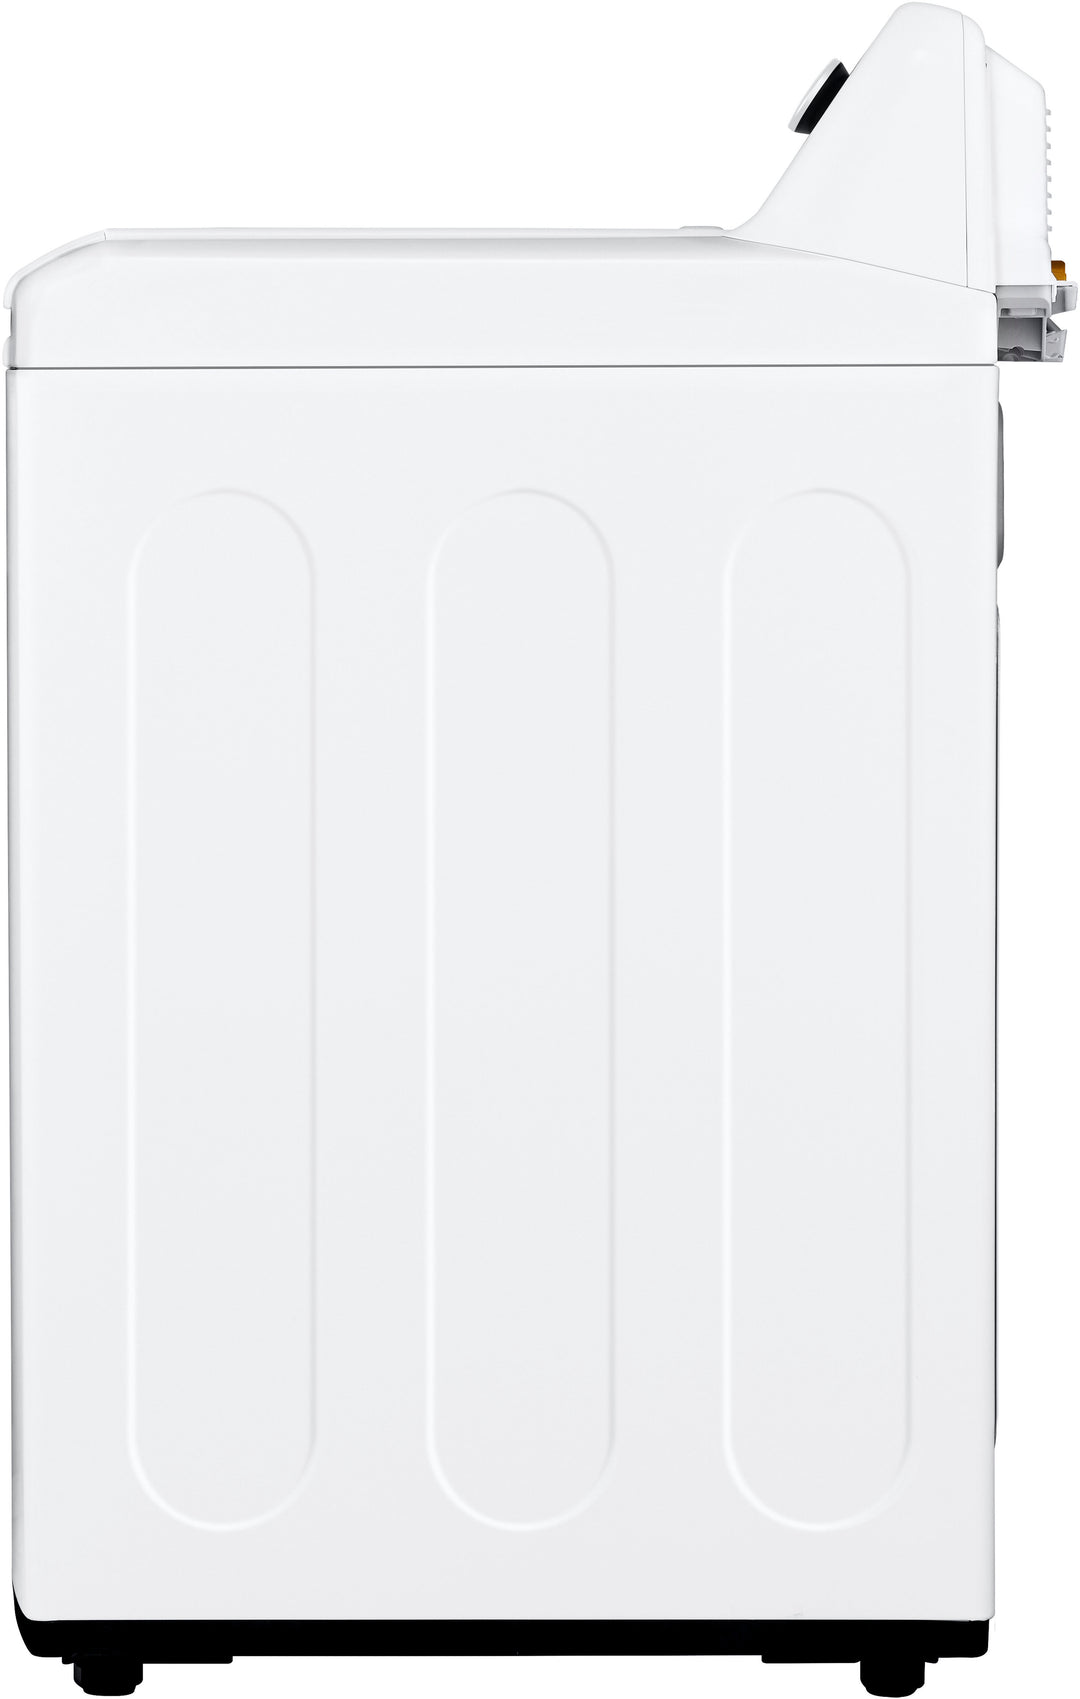 LG - 4.3 Cu. Ft. High-Efficiency Top Load Washer with SlamProof Glass Lid - White_7